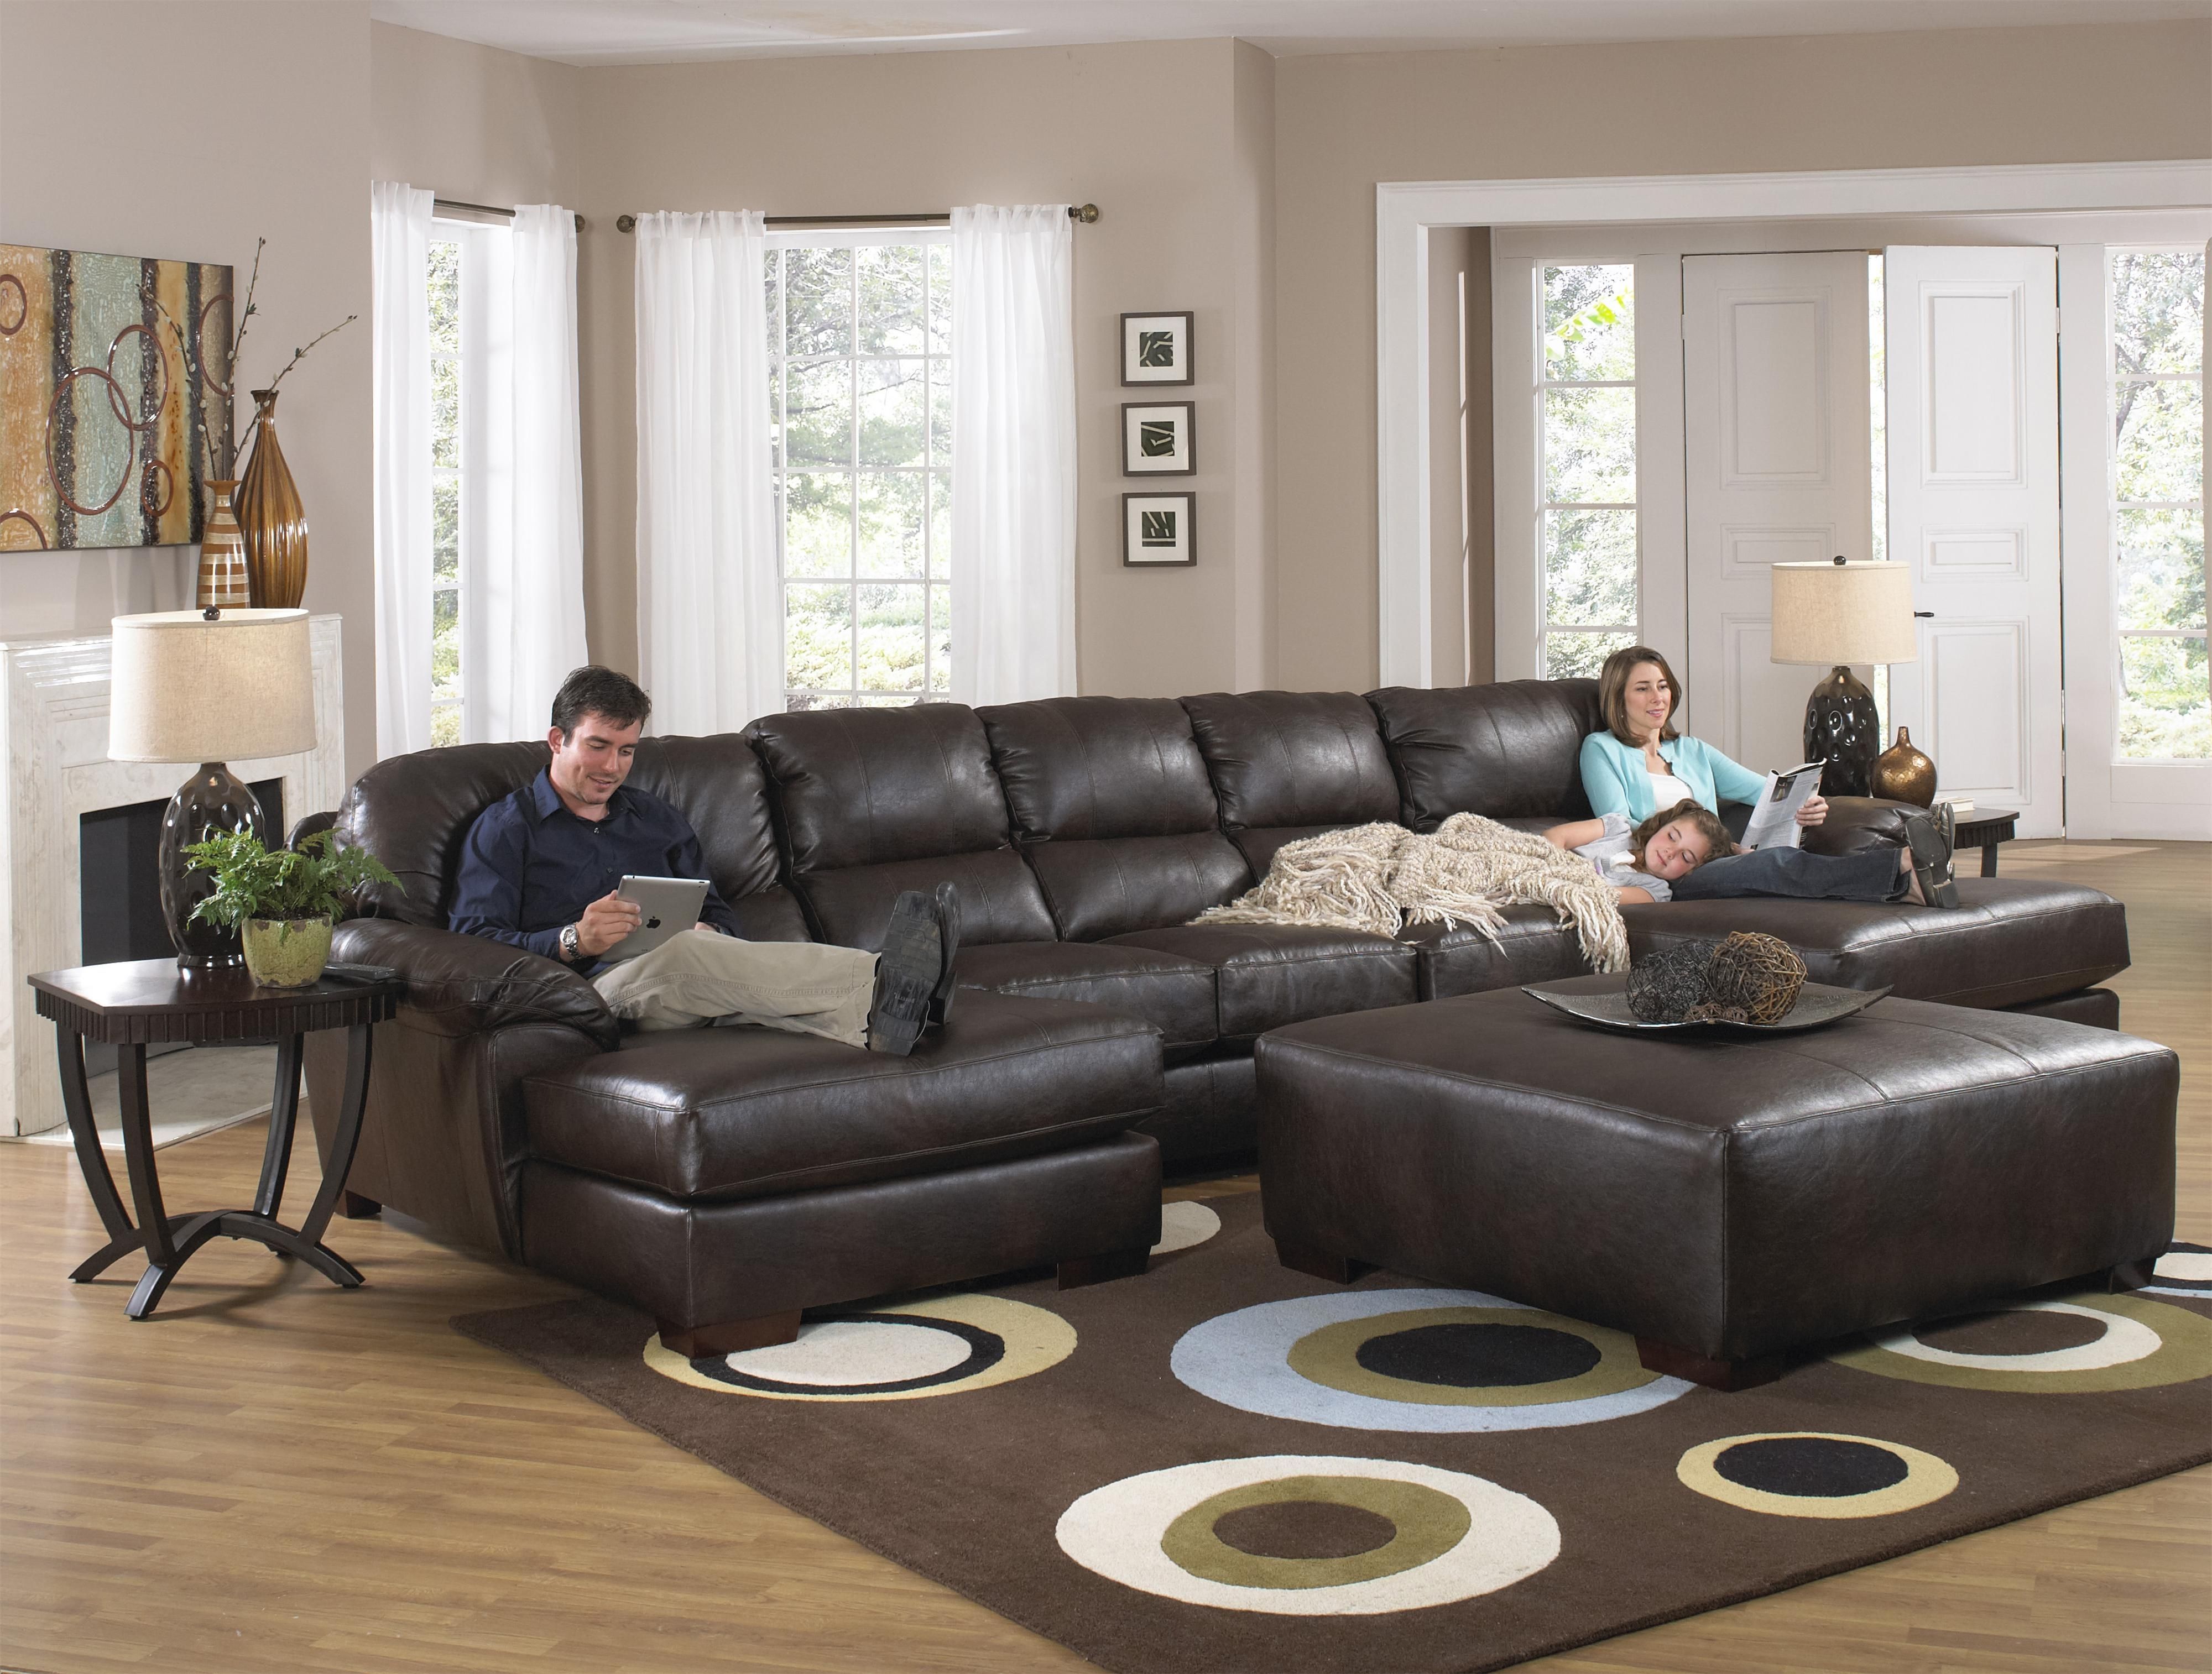 Most Recent Chaise Sectional Sofas Throughout Two Chaise Sectional Sofa With Five Total Seatsjackson (View 8 of 15)